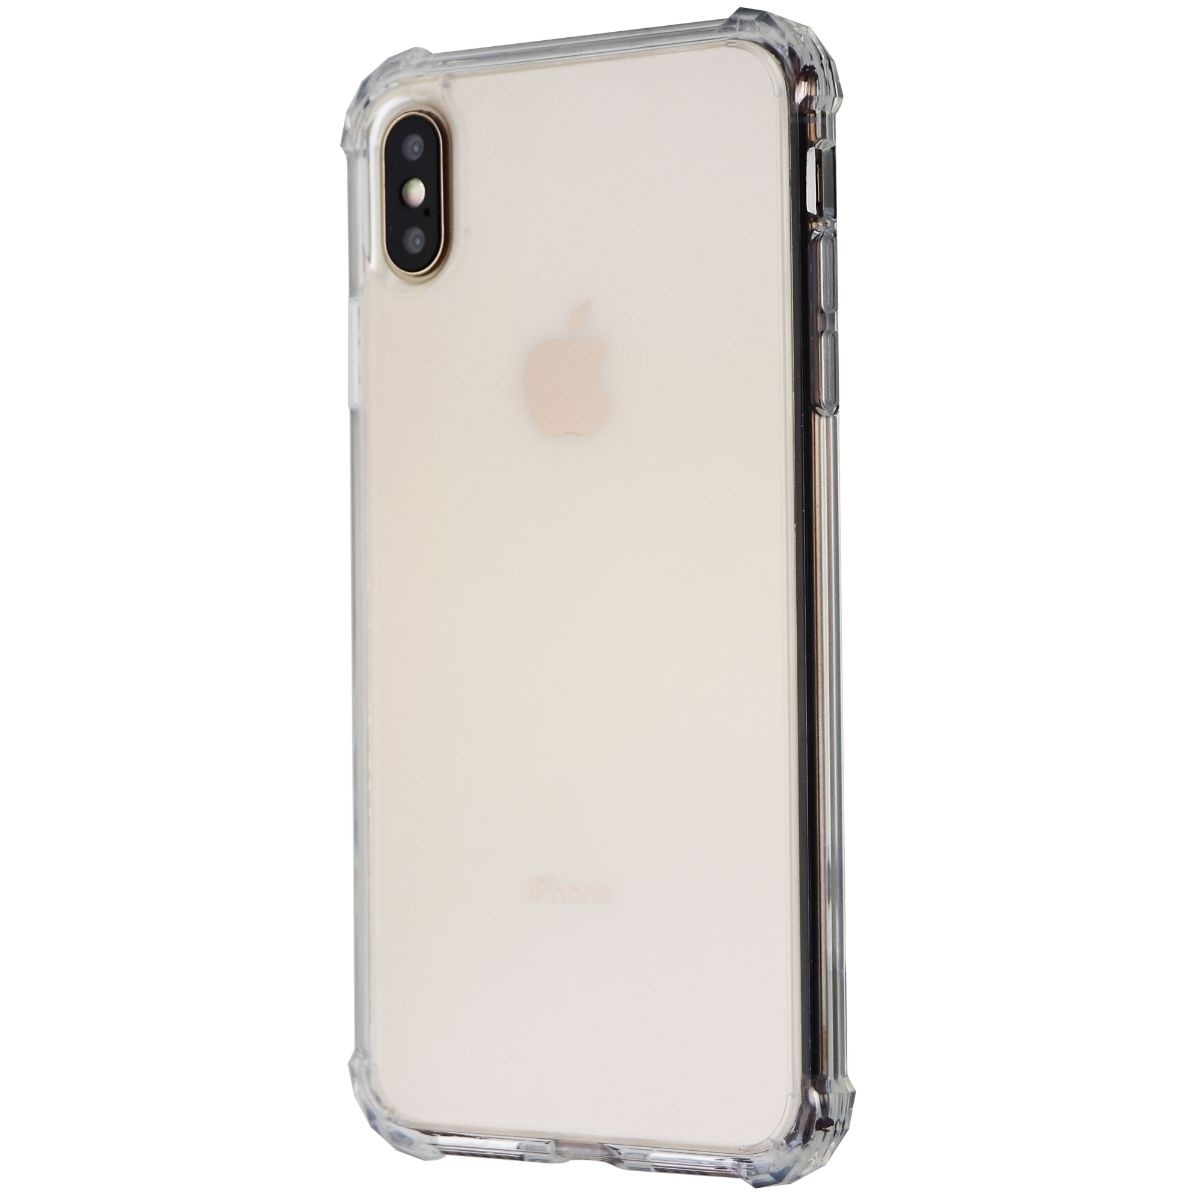 Verizon (WTLSUNCLCOV) Clarity Phone Case For IPhone XS Max 6.5 Inch - Clear